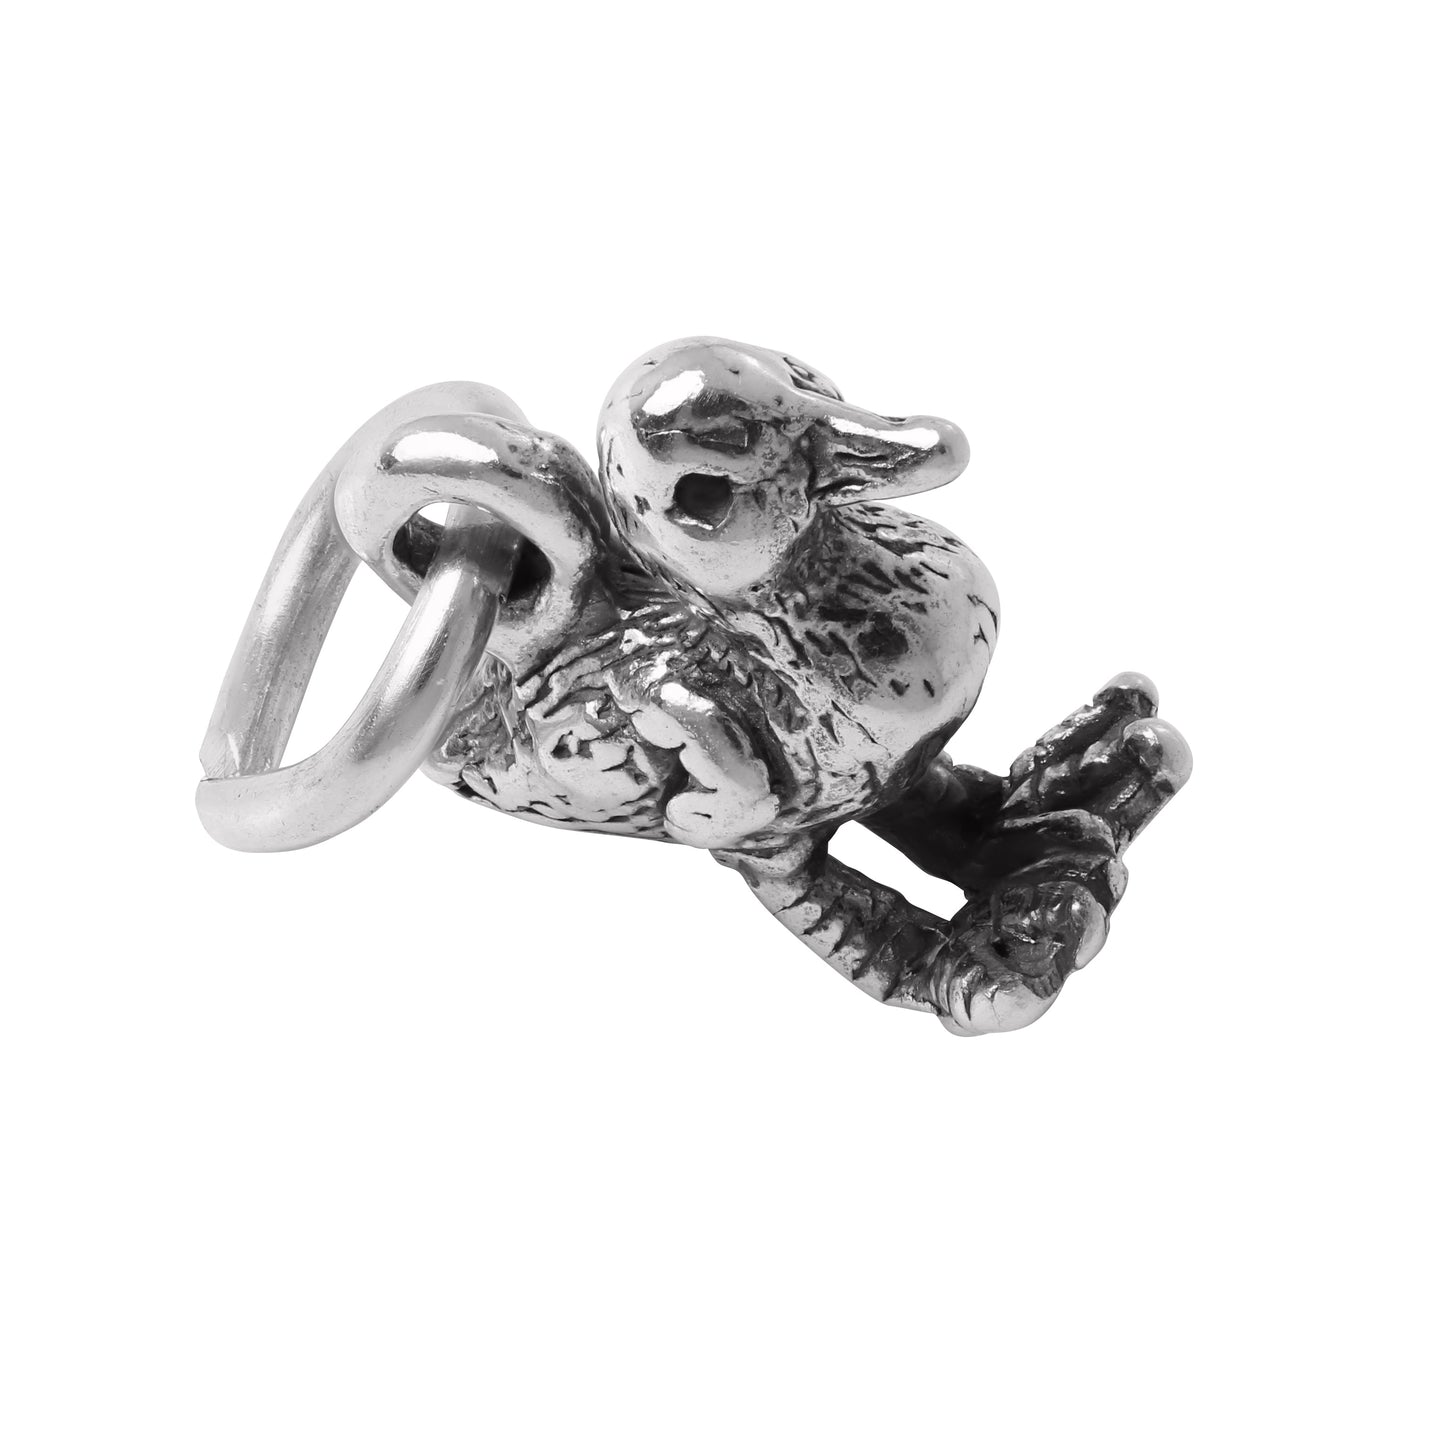 Sterling Silver 3D Duckling Charm